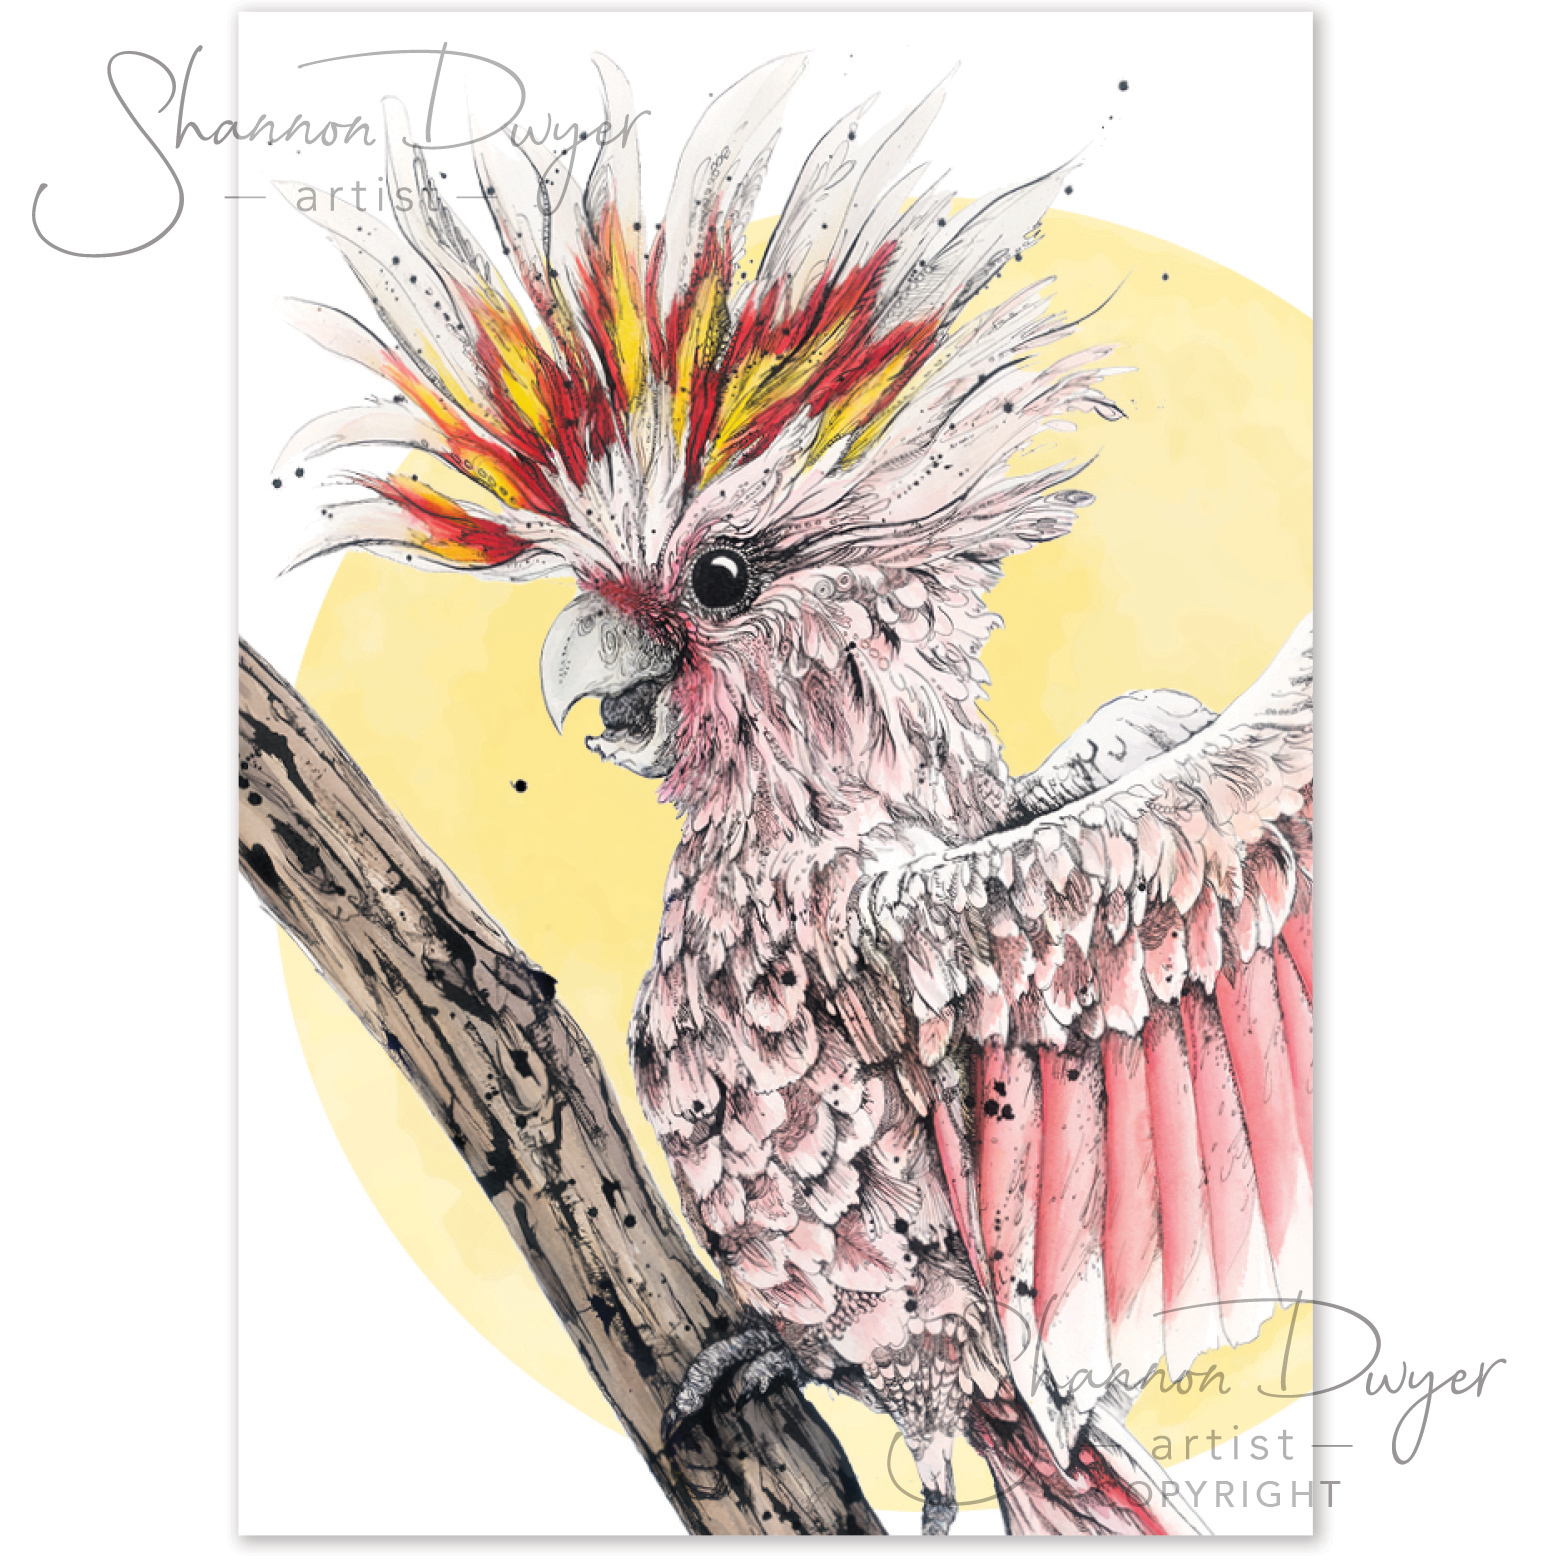 'Frankie' POP Greeting Card artwork of a Pink Cockatoo by Shannon Dwyer Artist